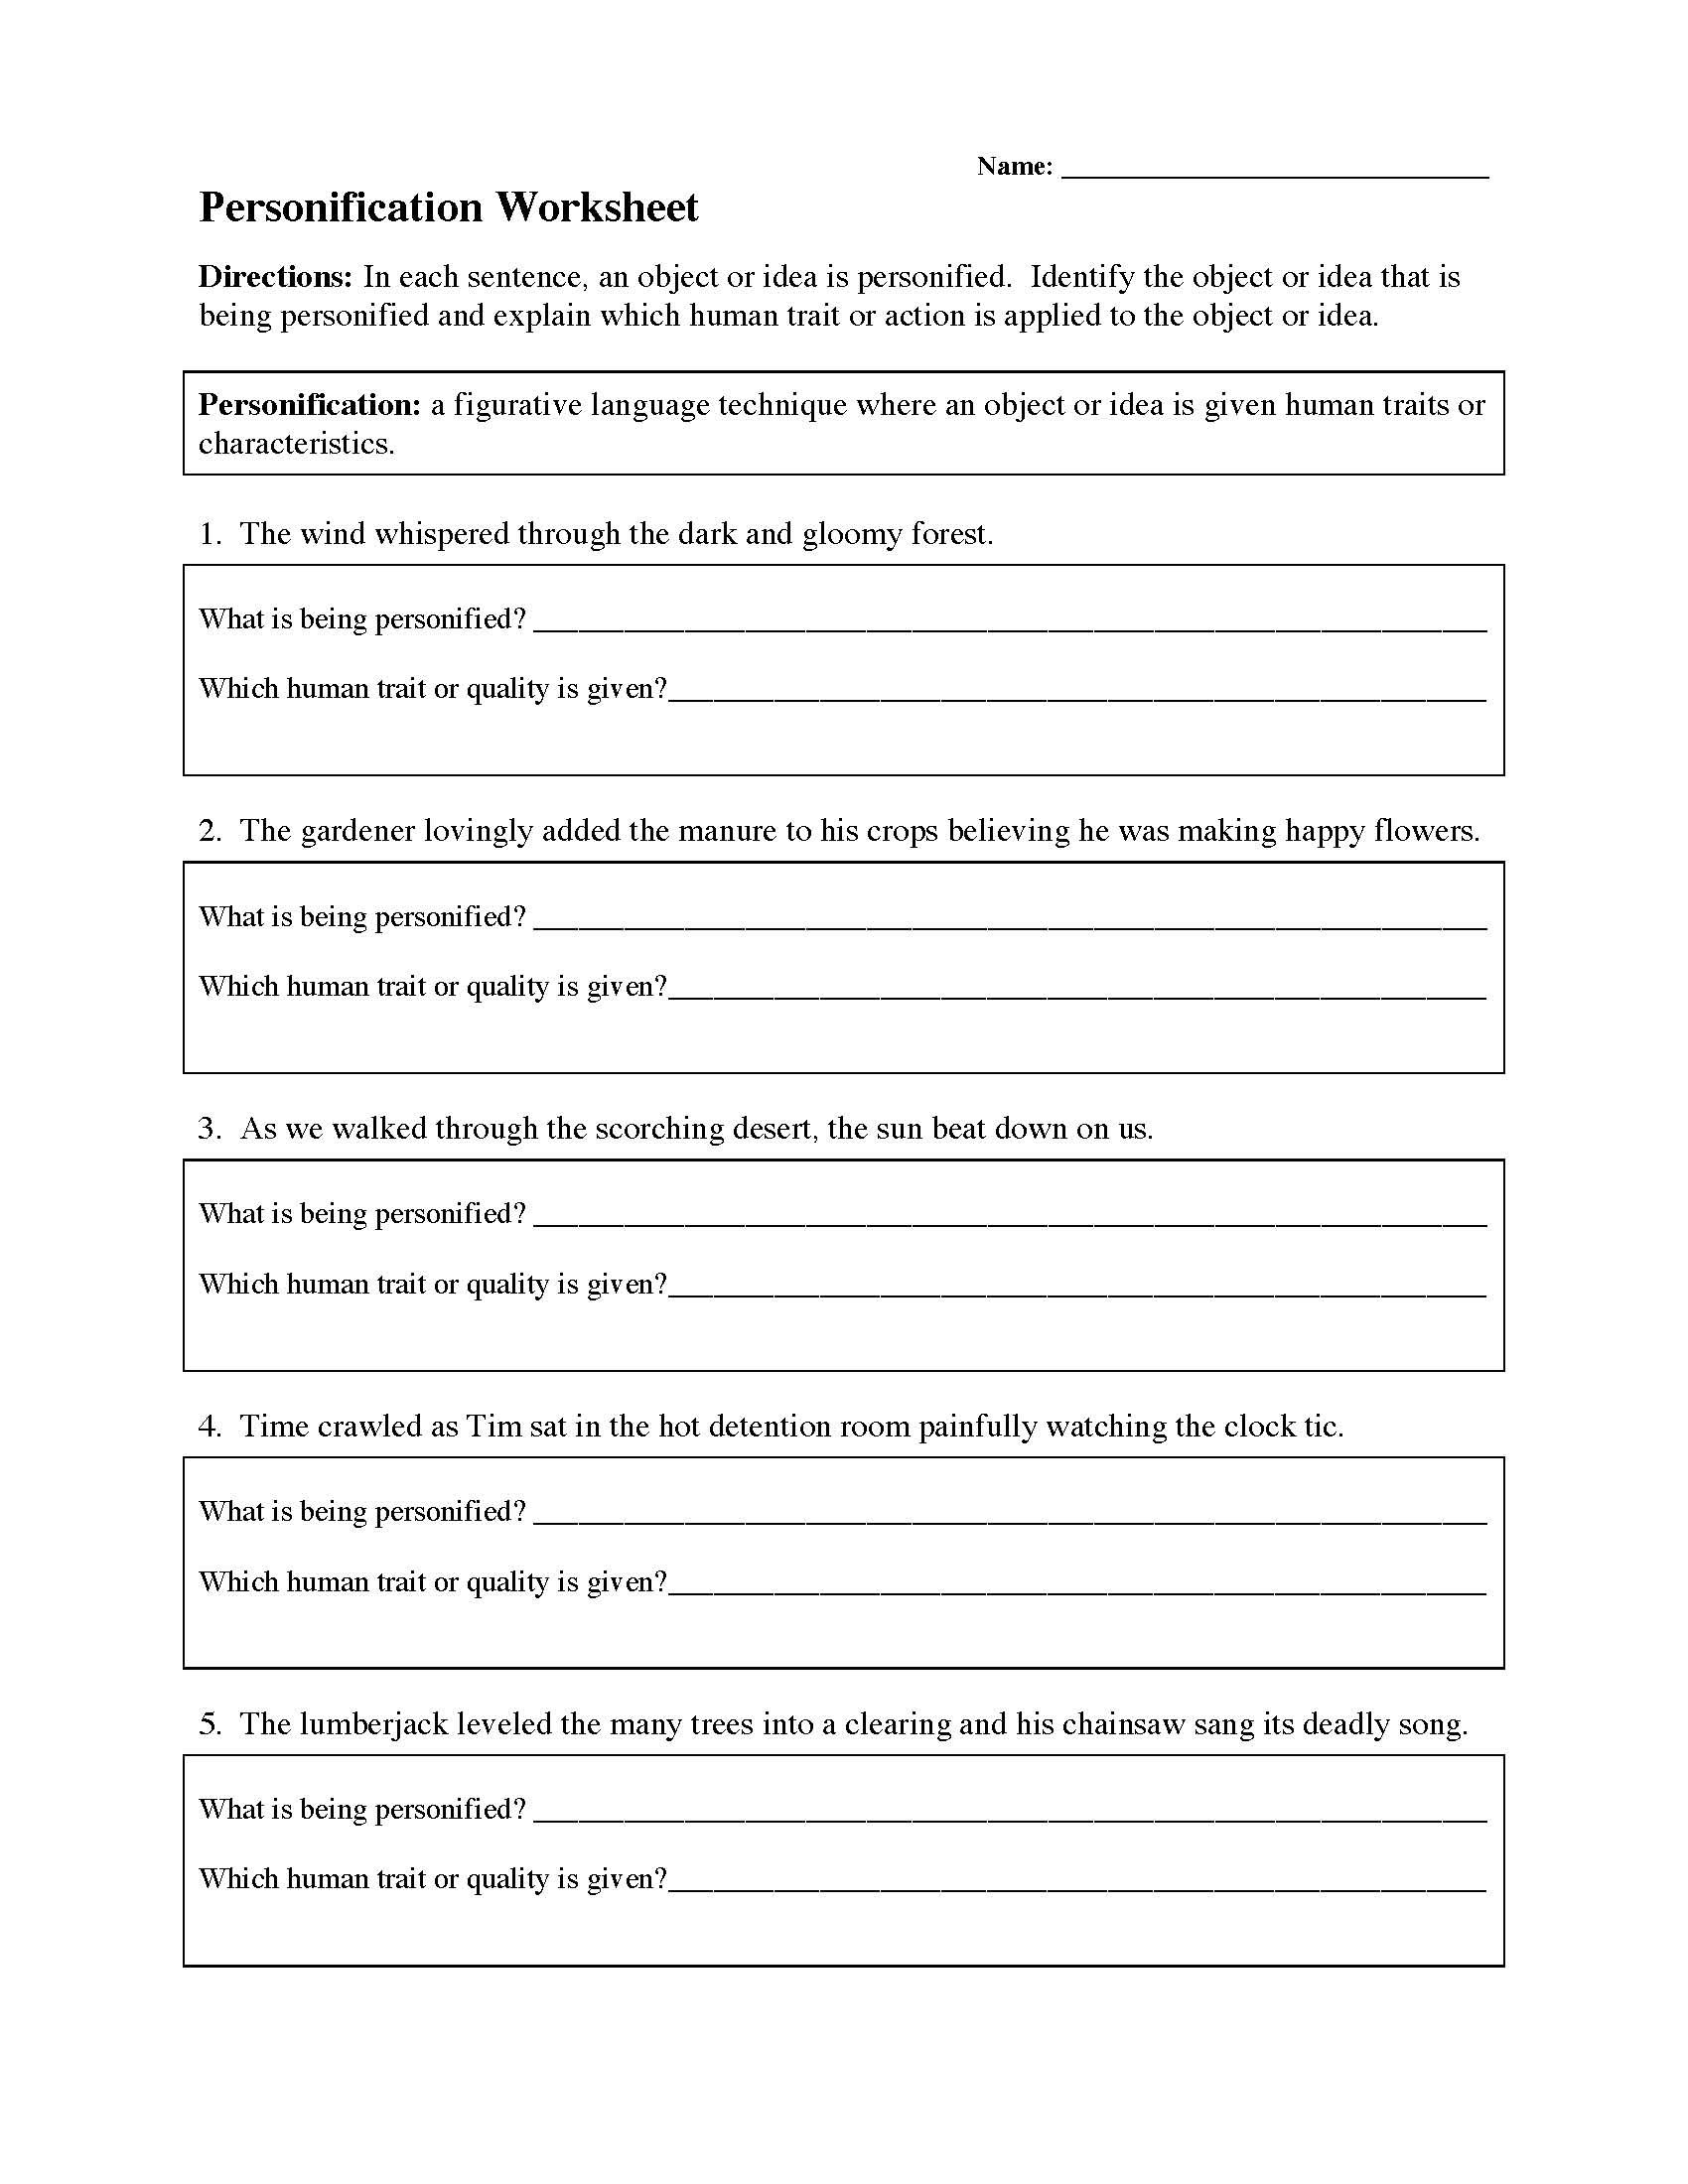 personification-worksheets-figurative-language-activities